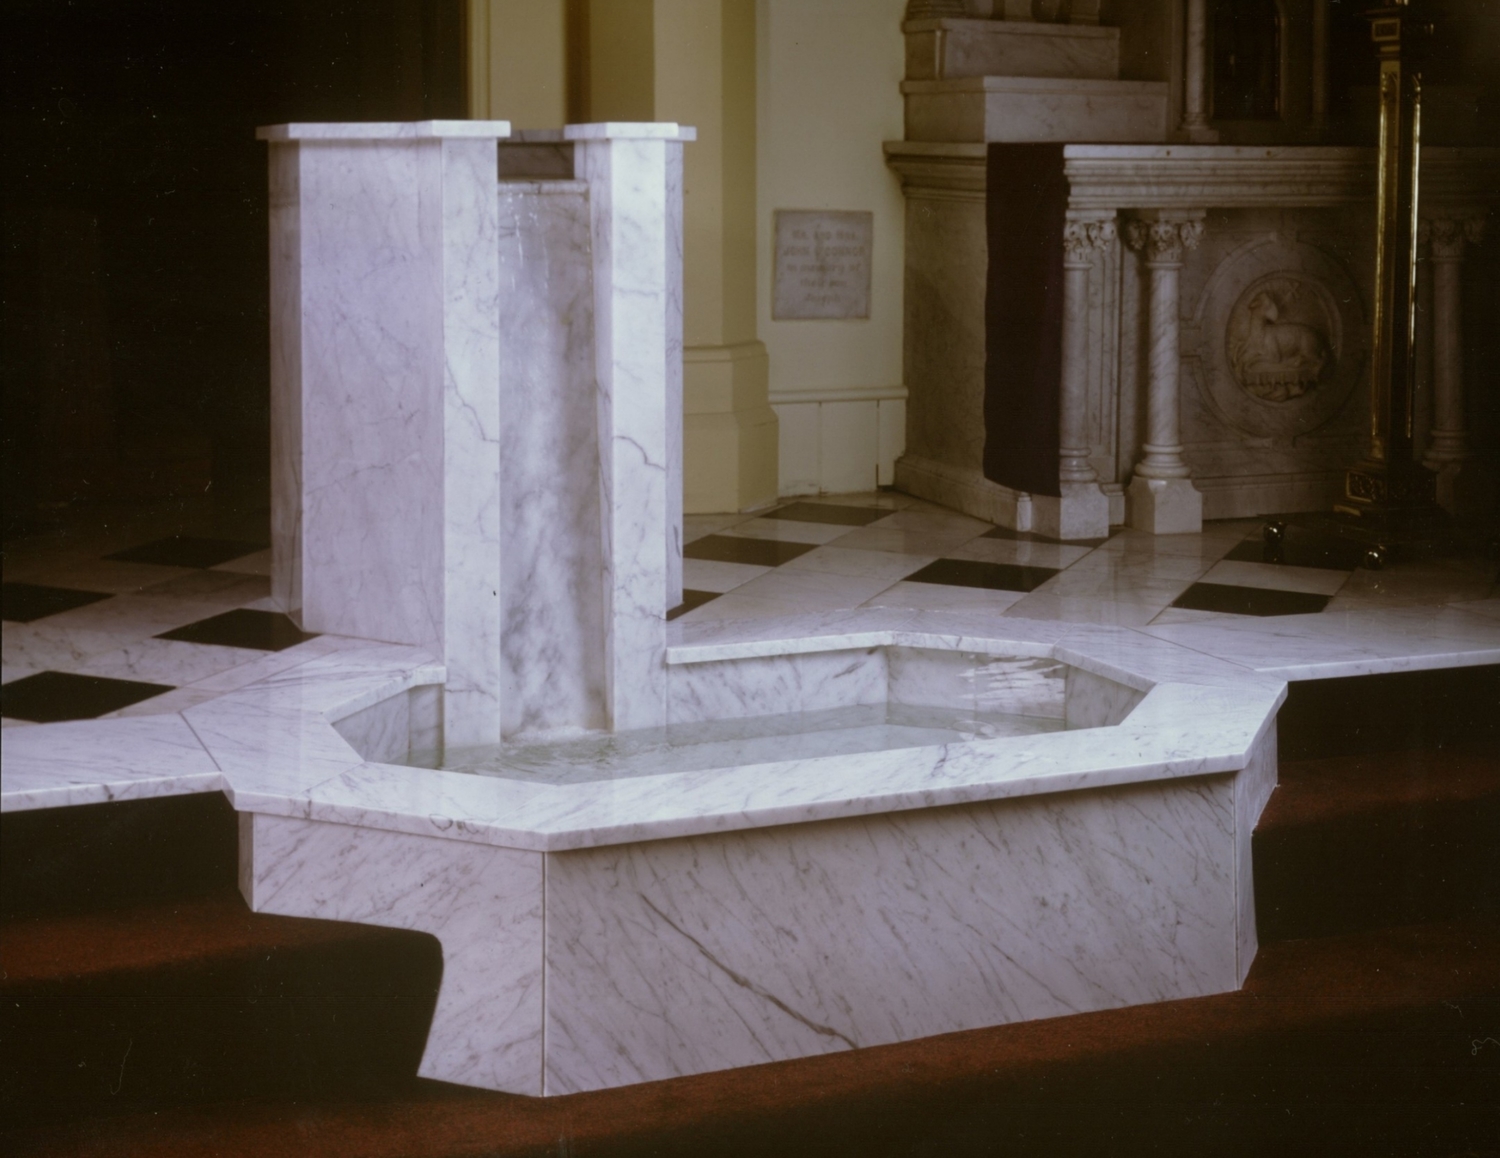 baptismal-font-immaculate-conception-newburyport-ma-by-water-structures